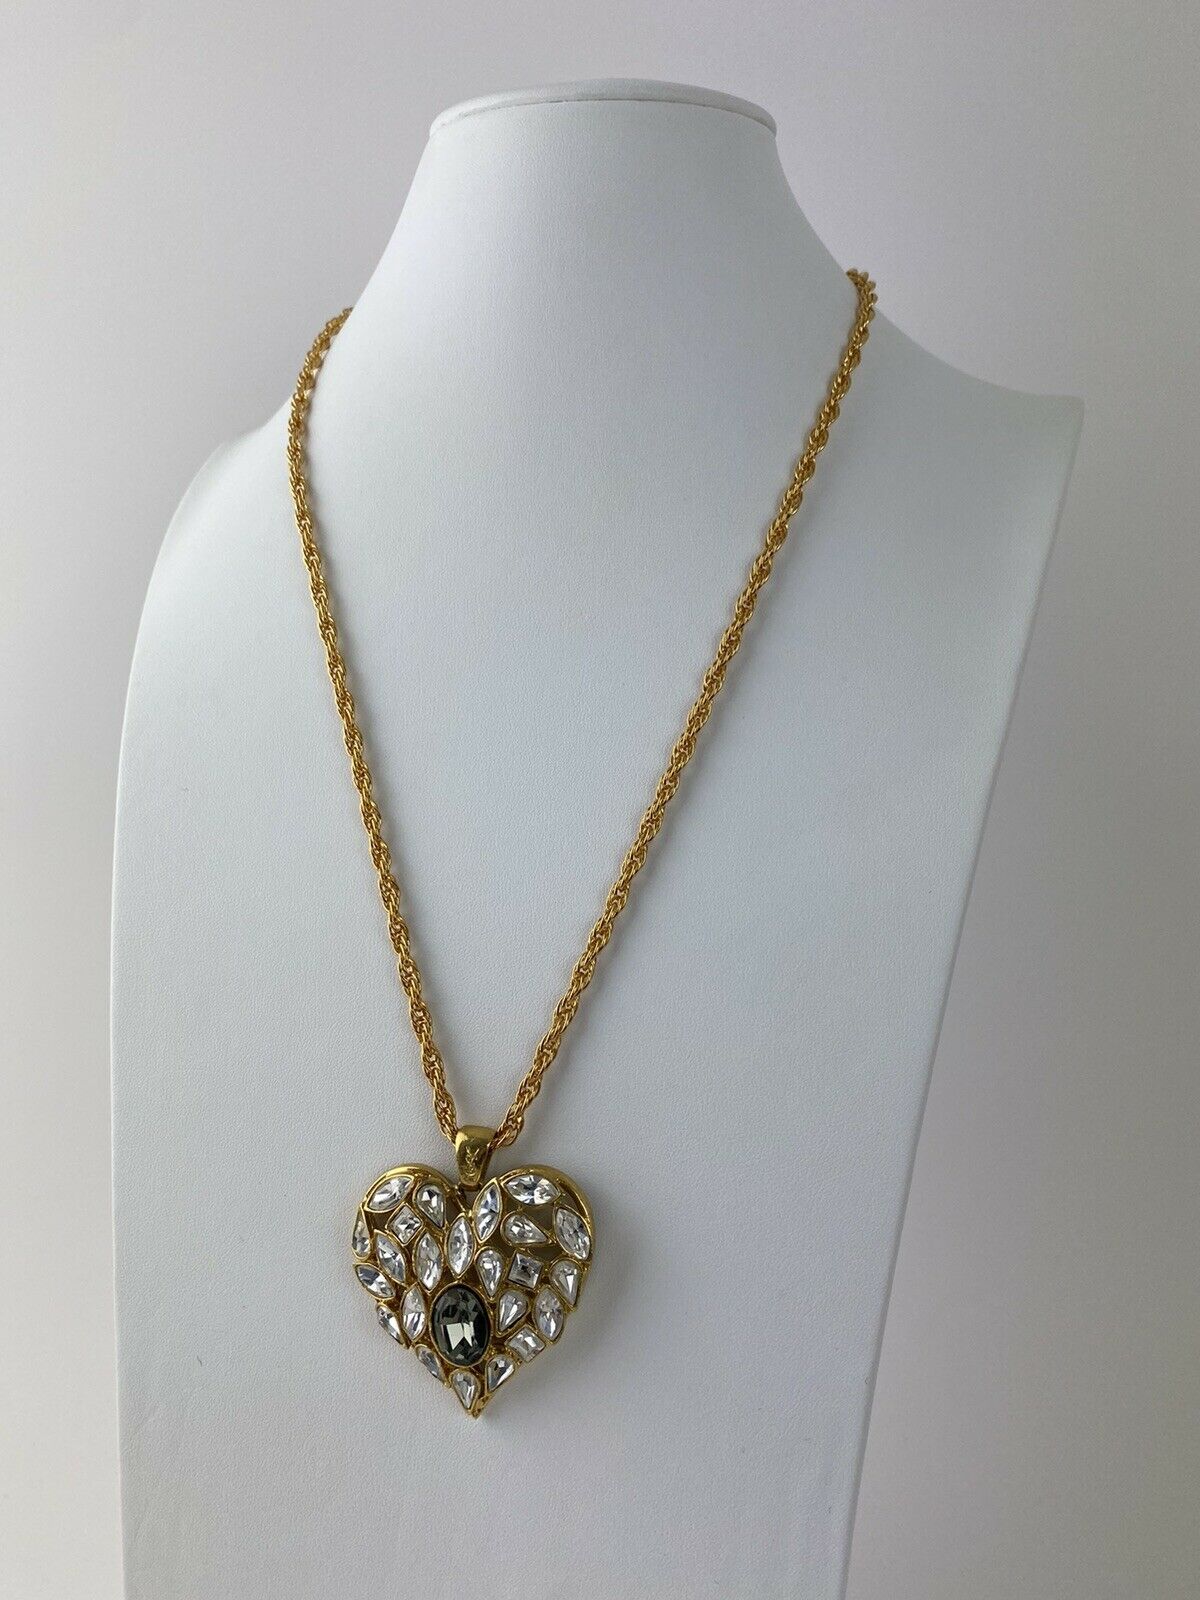 【SOLD OUT】YSL Yves Saint Laurent Vintage Gold Tone Heart Necklace Rhinestone